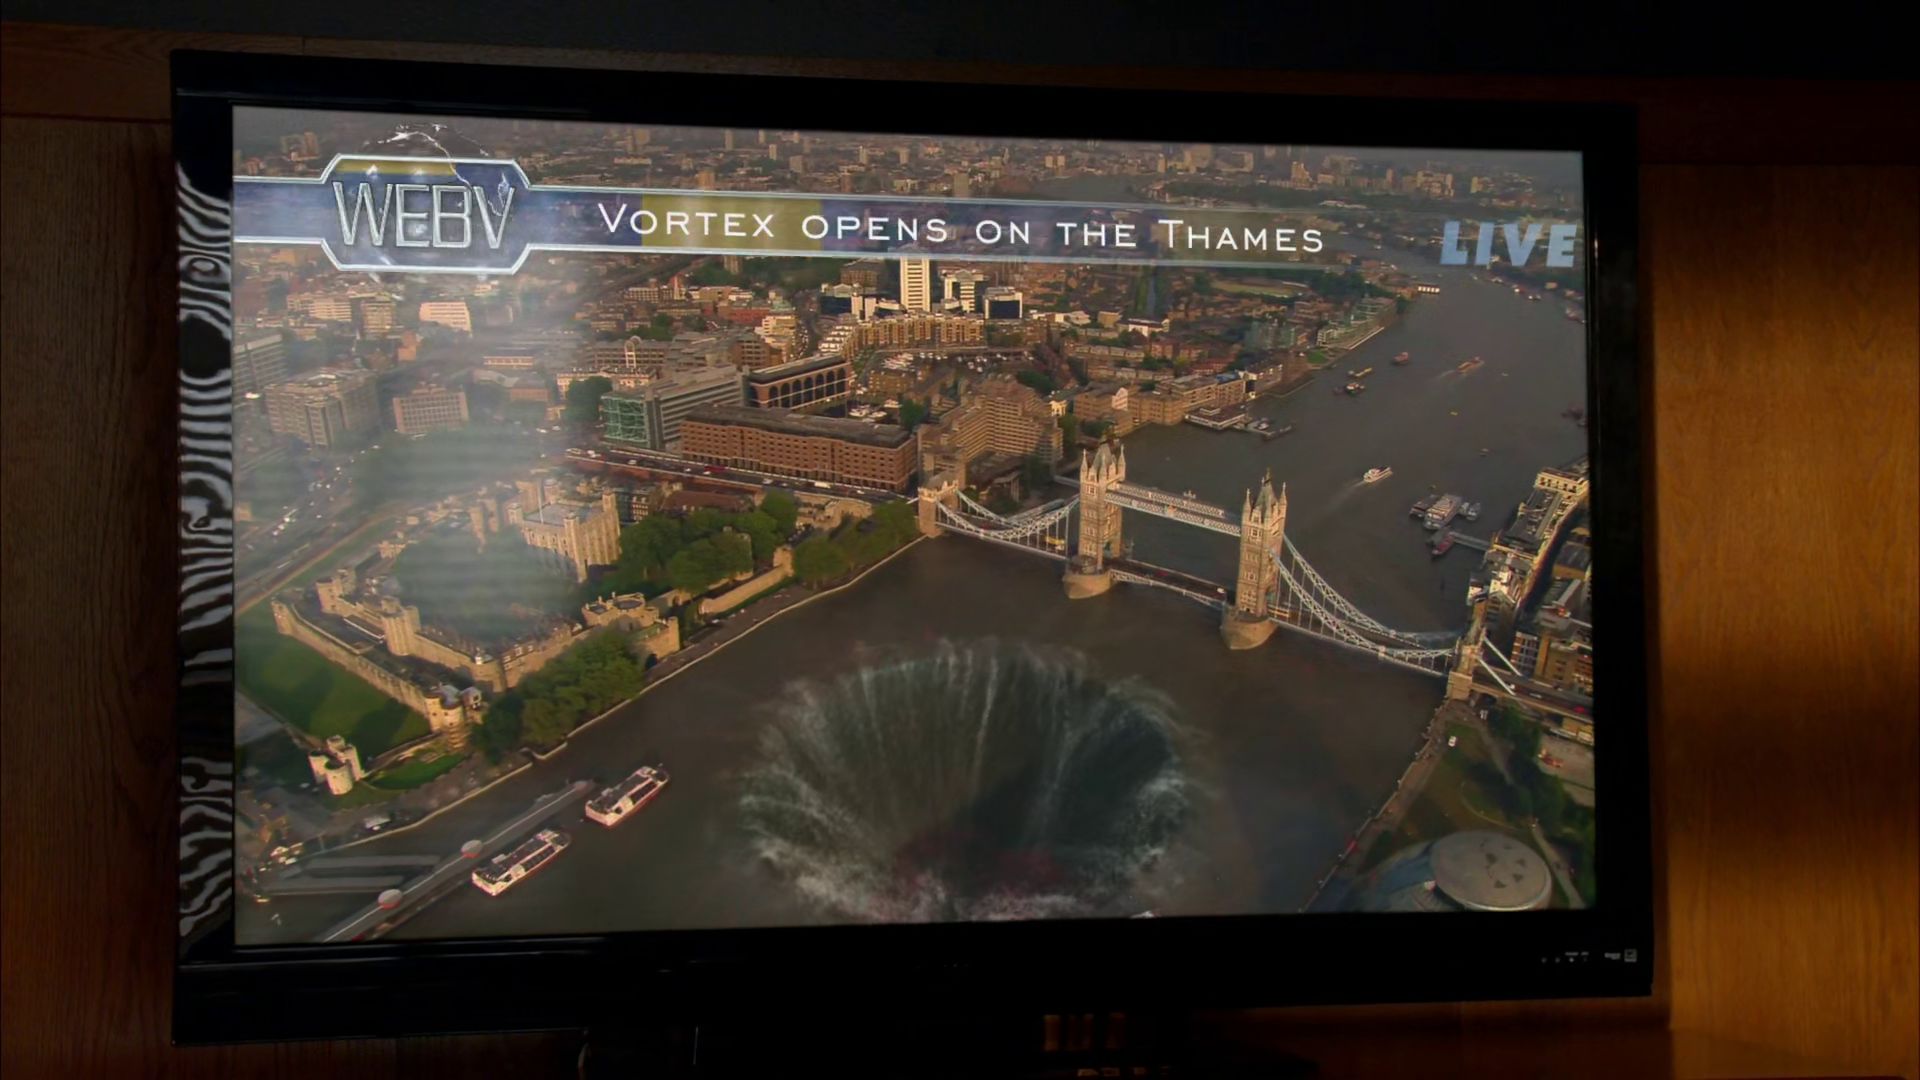 Difference: Vortex on the Thames